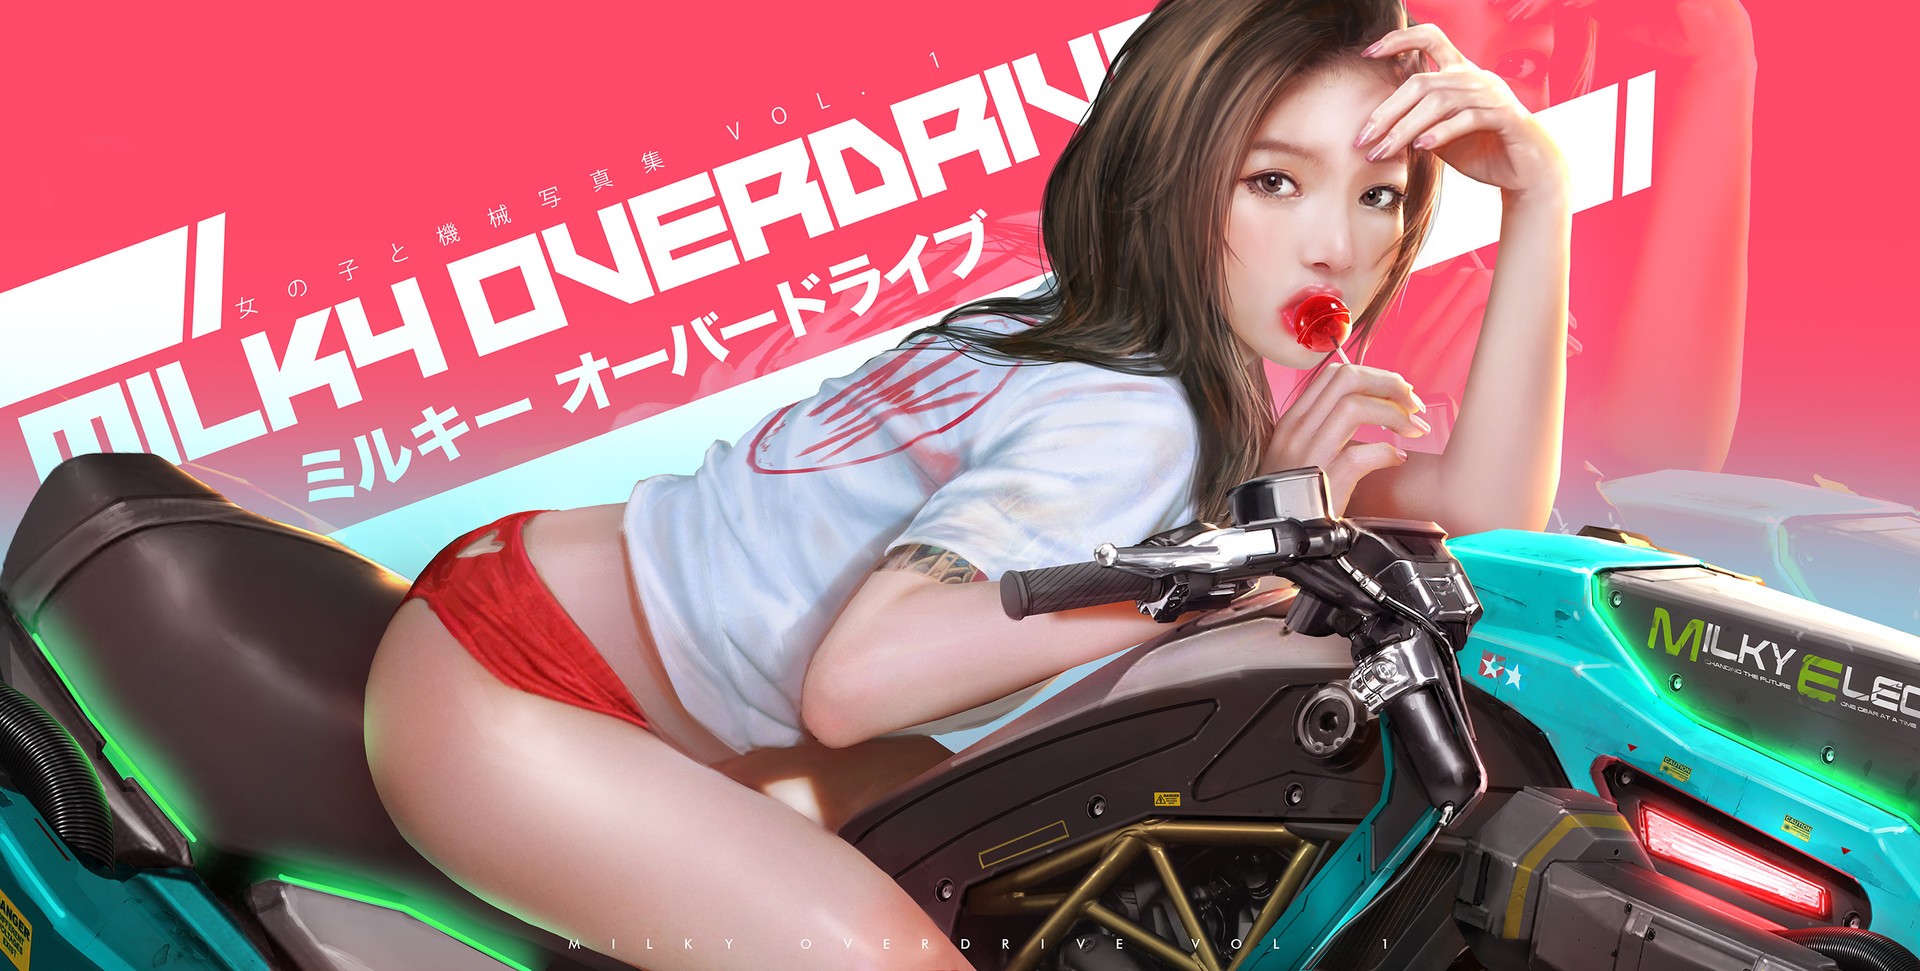 General 1920x971 Asian tattoo women motorcycle artwork Johnson Ting thighs food sweets lollipop women with motorcycles brunette watermarked looking at viewer bent over inked girls T-shirt white t-shirt panties red panties